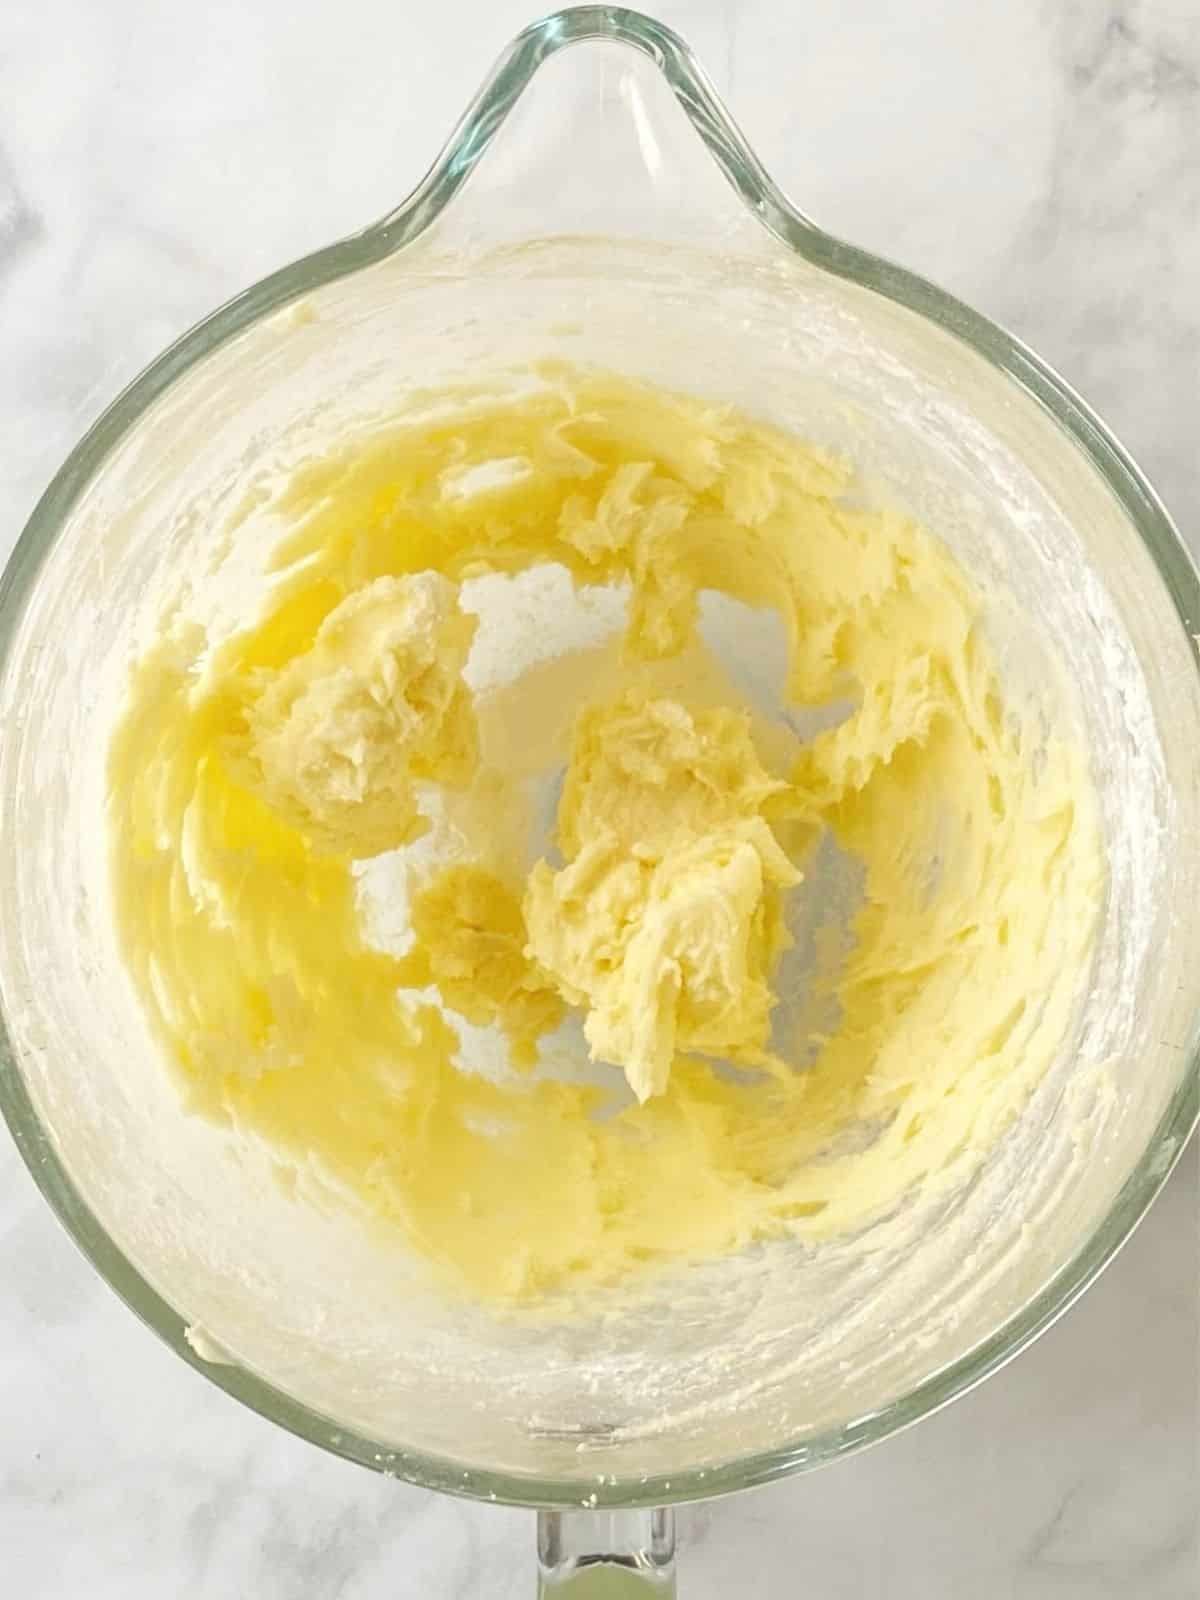 Creaming butter and sugar in mixing bowl.